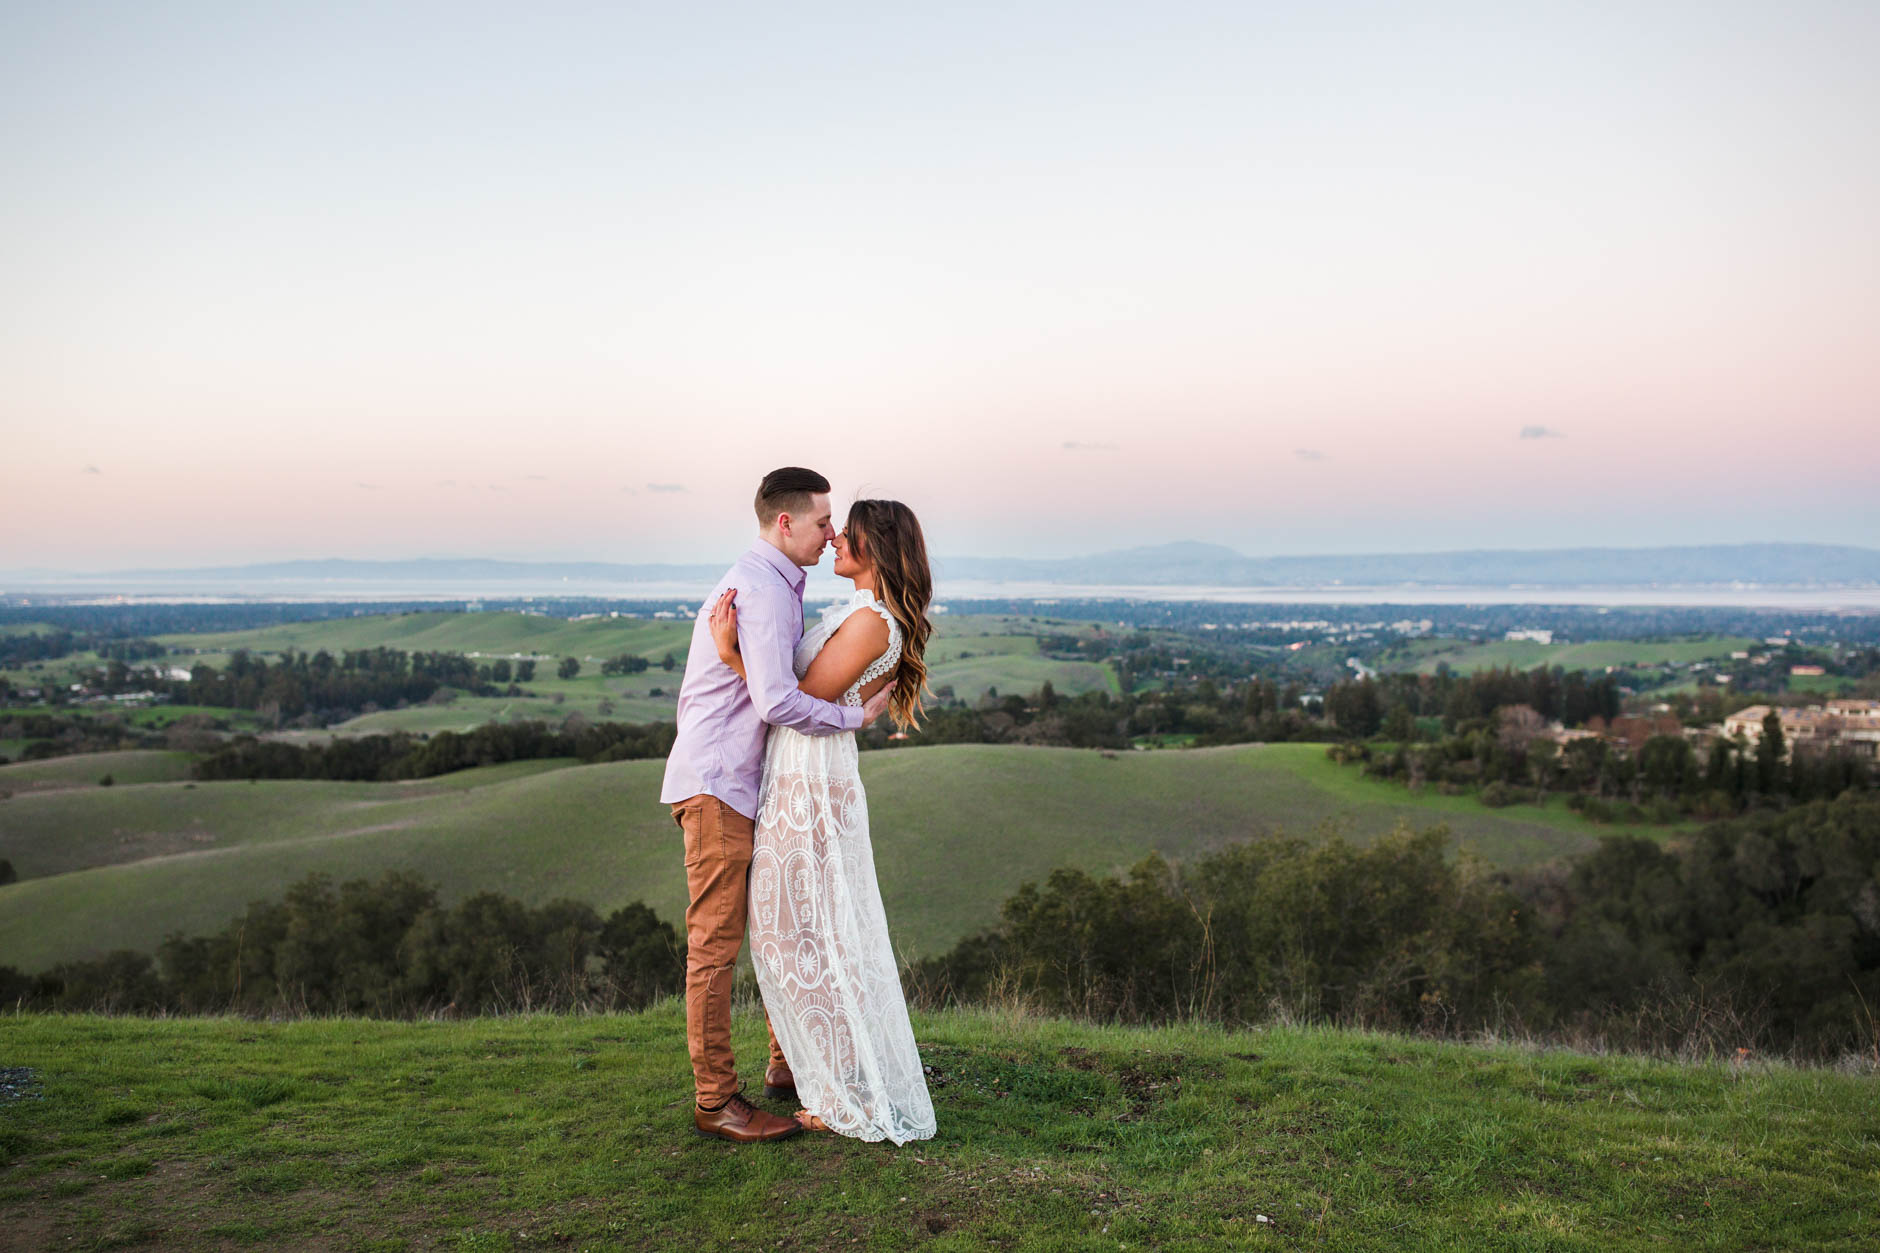 Foothills Park engagement session, couple hugging with view of the Bay behind them